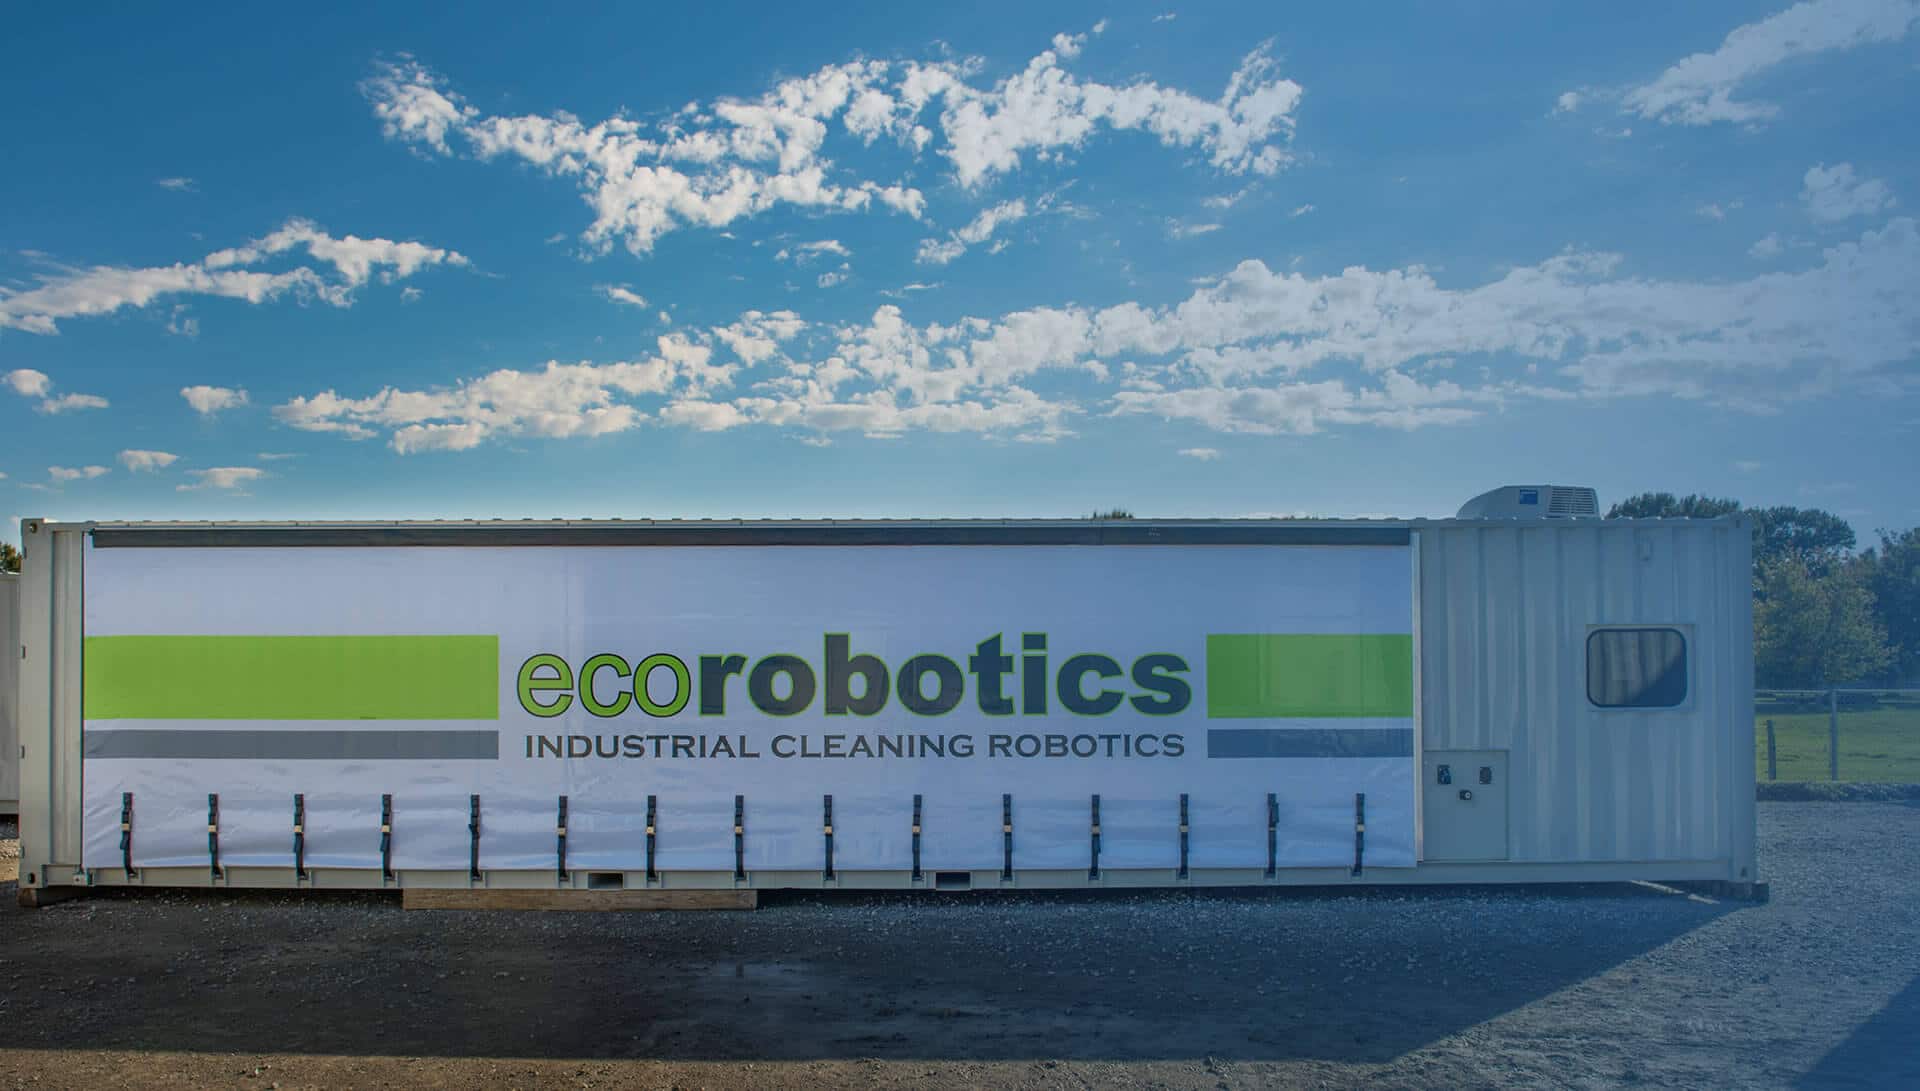 Ecorobotics: Industrial Cleaning Services Container Building